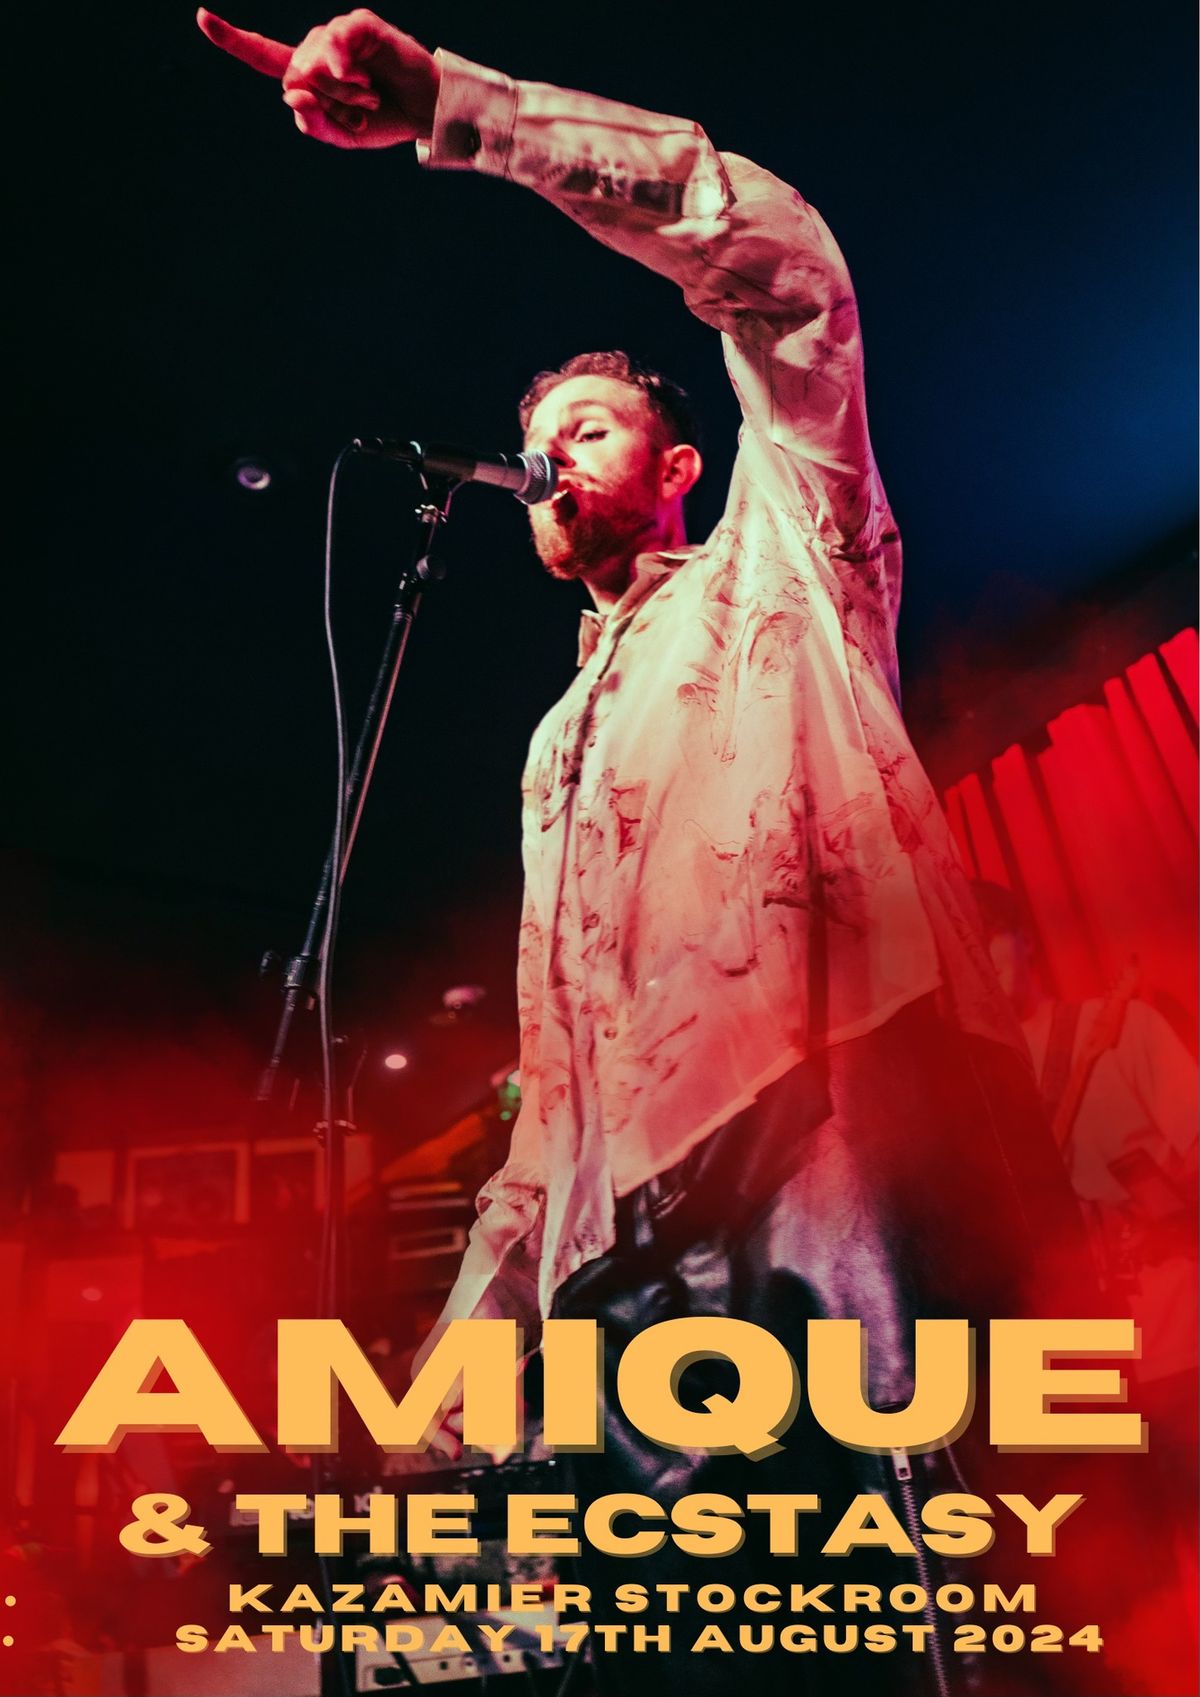 AMIQUE AND THE ECSTASY LIVE AT KAZIMIER STOCKROOM